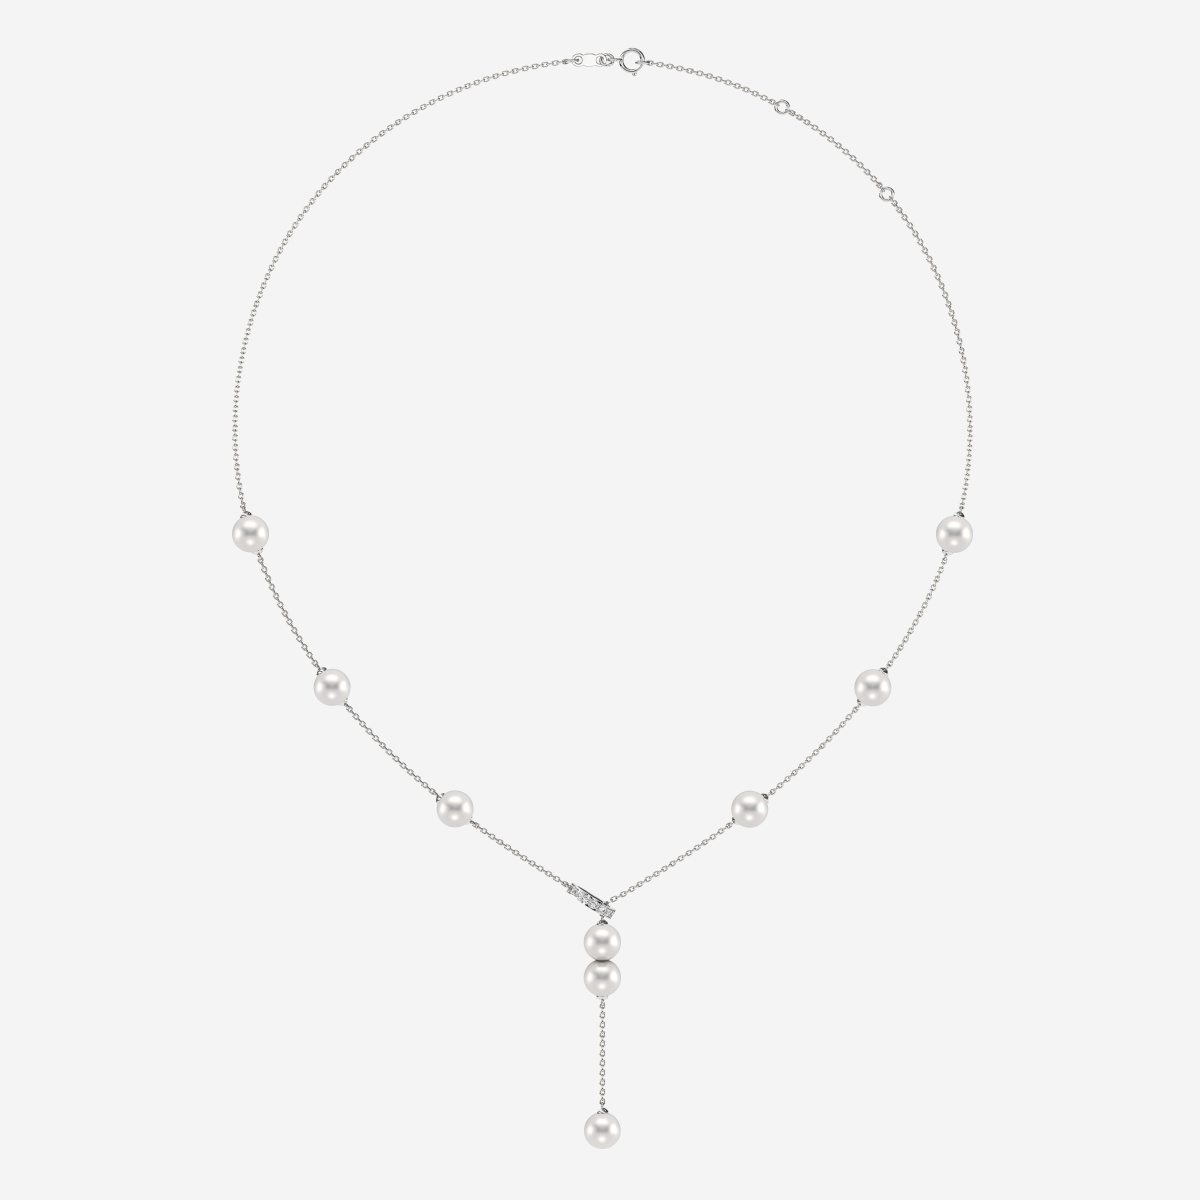 Additional Image 1 for  6.5 - 7.0 mm Cultured Freshwater Pearl and 1/8 ctw Lab Grown Diamond Lariat Fashion Necklace